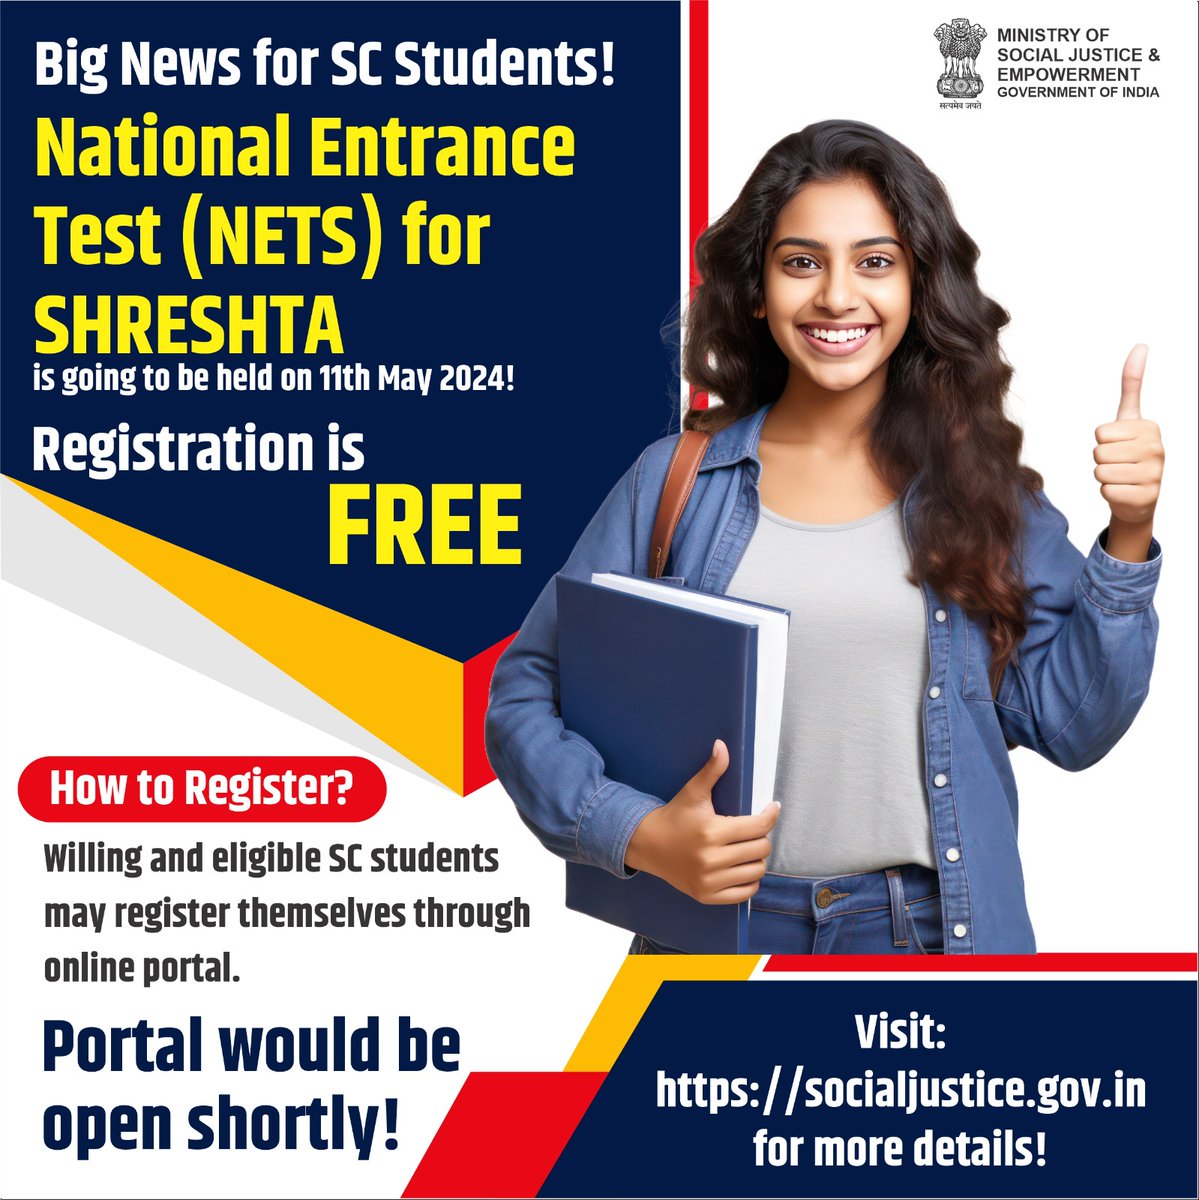 The National Entrance Test (NETS) for SHRESHTA is happening on 11 May 2024, and here's your chance to pave the way for a brighter future! Registration is completely FREE!
#NETS2024 #SHRESHTA #FreeRegistration #EducationForAll #SCStudentsPower'